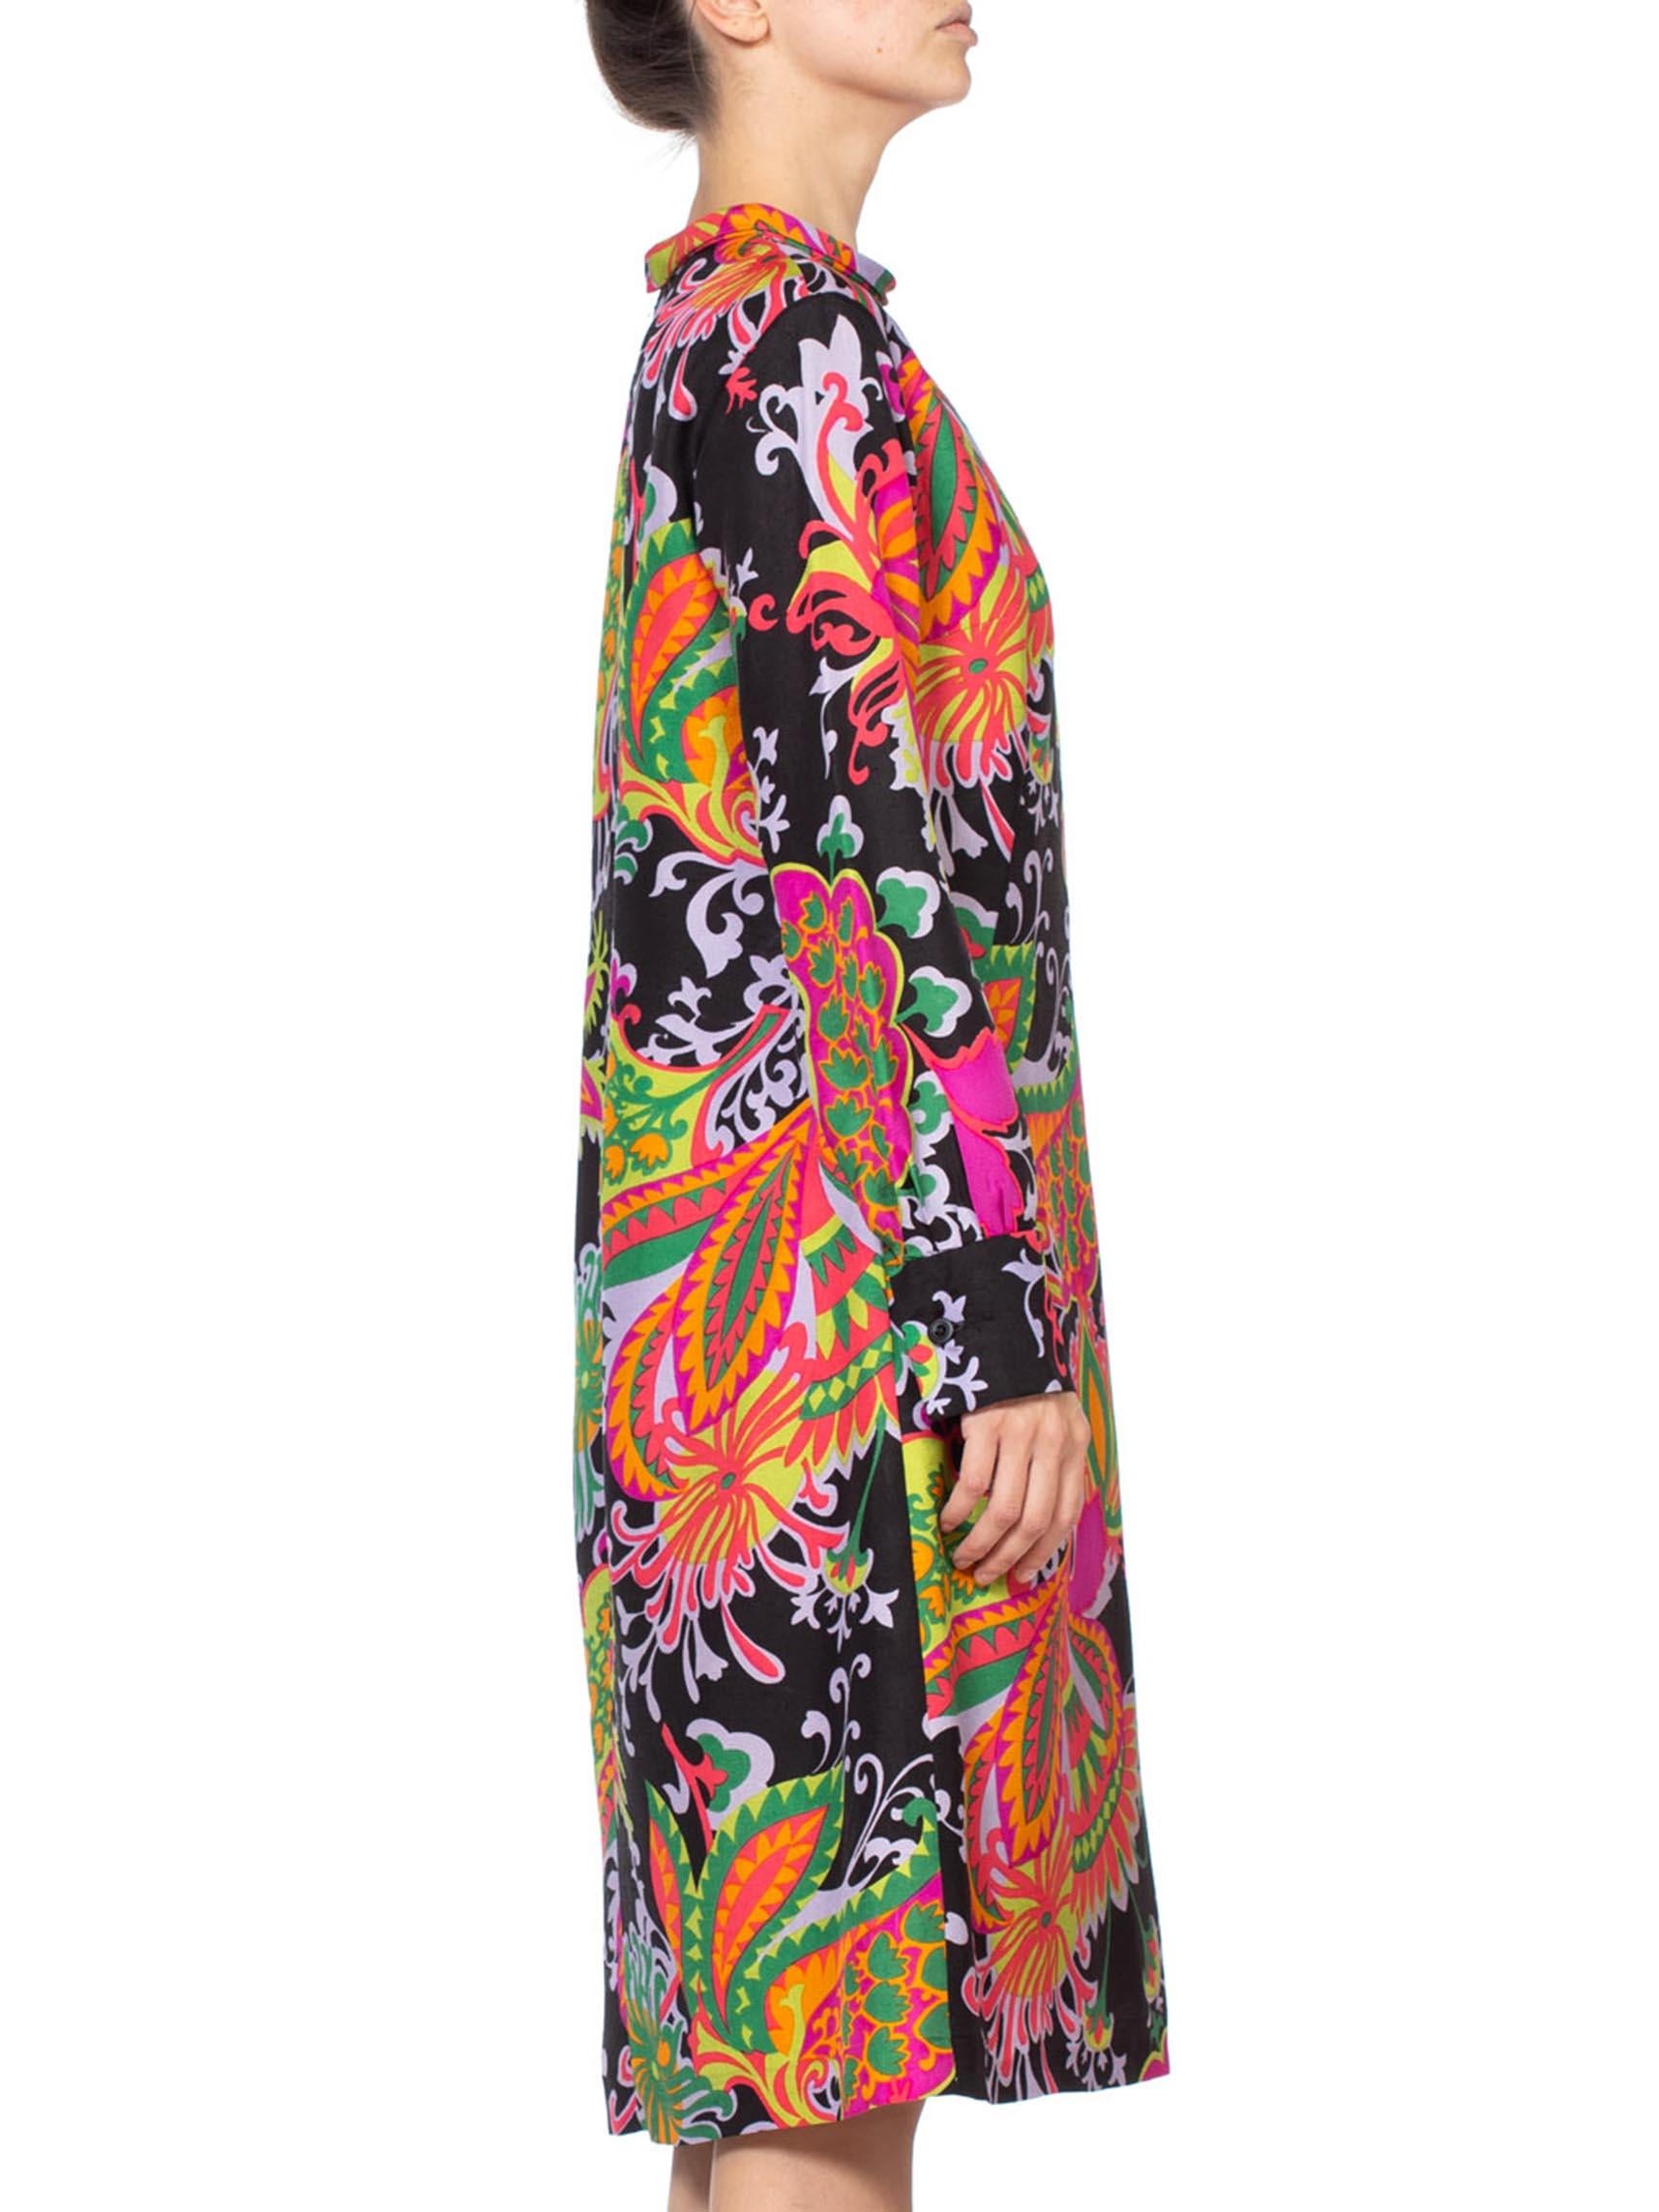 70s psychedelic dress